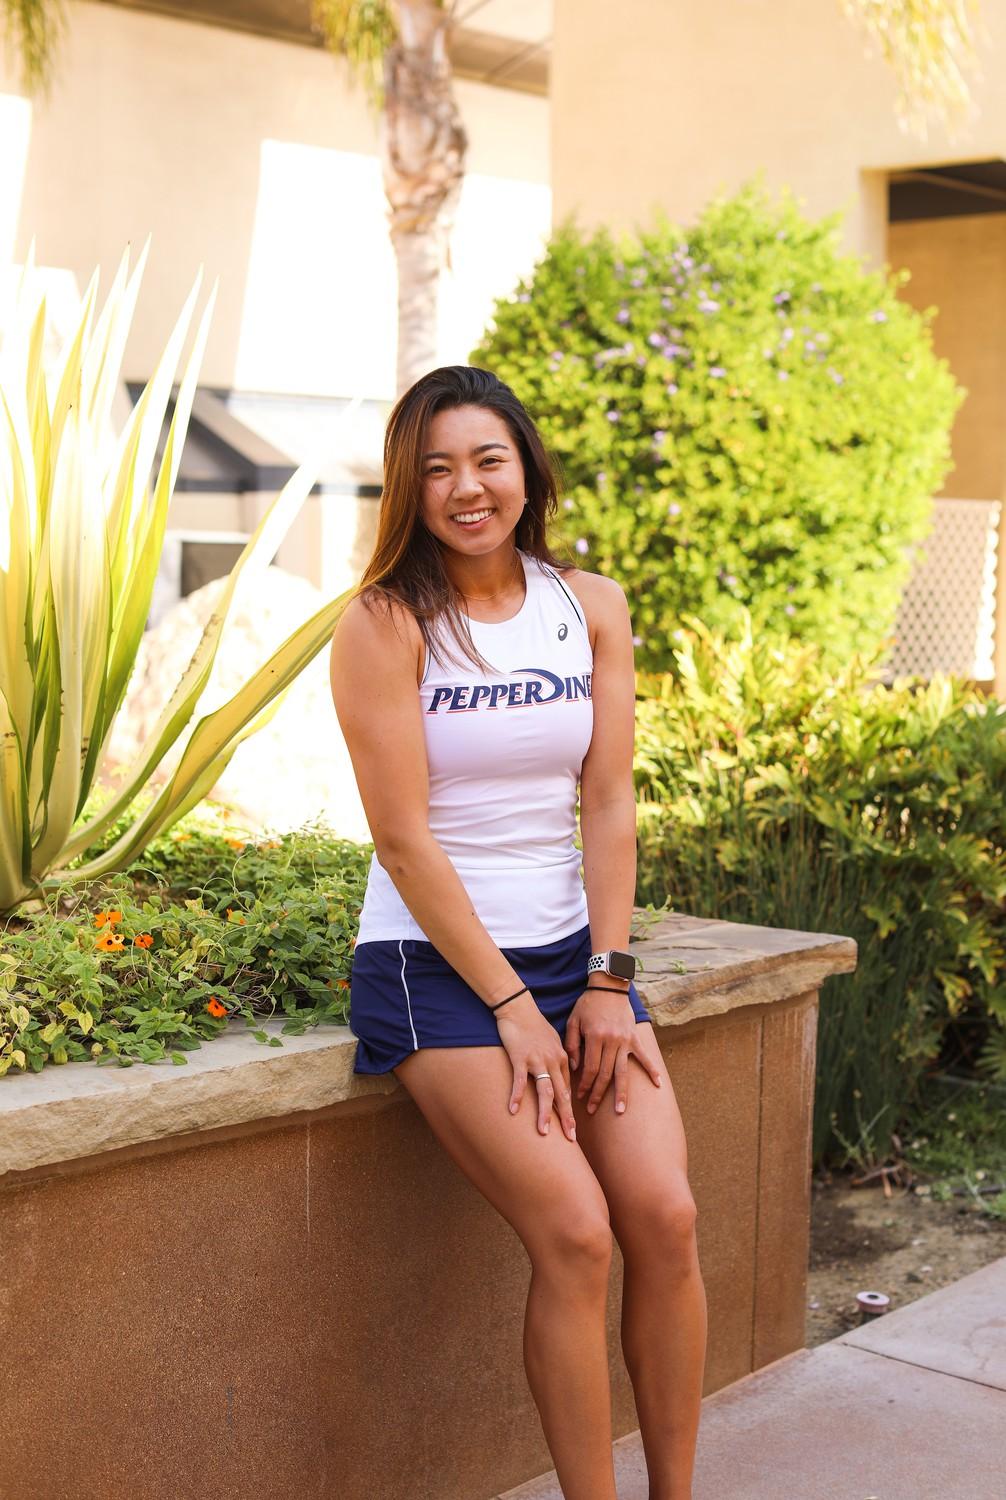 Photo by Caroline Conder | Shiori Fukuda, a student studying for her master’s degree in Global Business at Graziadio and women’s tennis player, sat on a wall outside of Firestone Fieldhouse. Fukuda clinched the winning point for Pepperdine in the 2021 quarterfinals, landing her at the bottom of a celebratory team dog-pile.